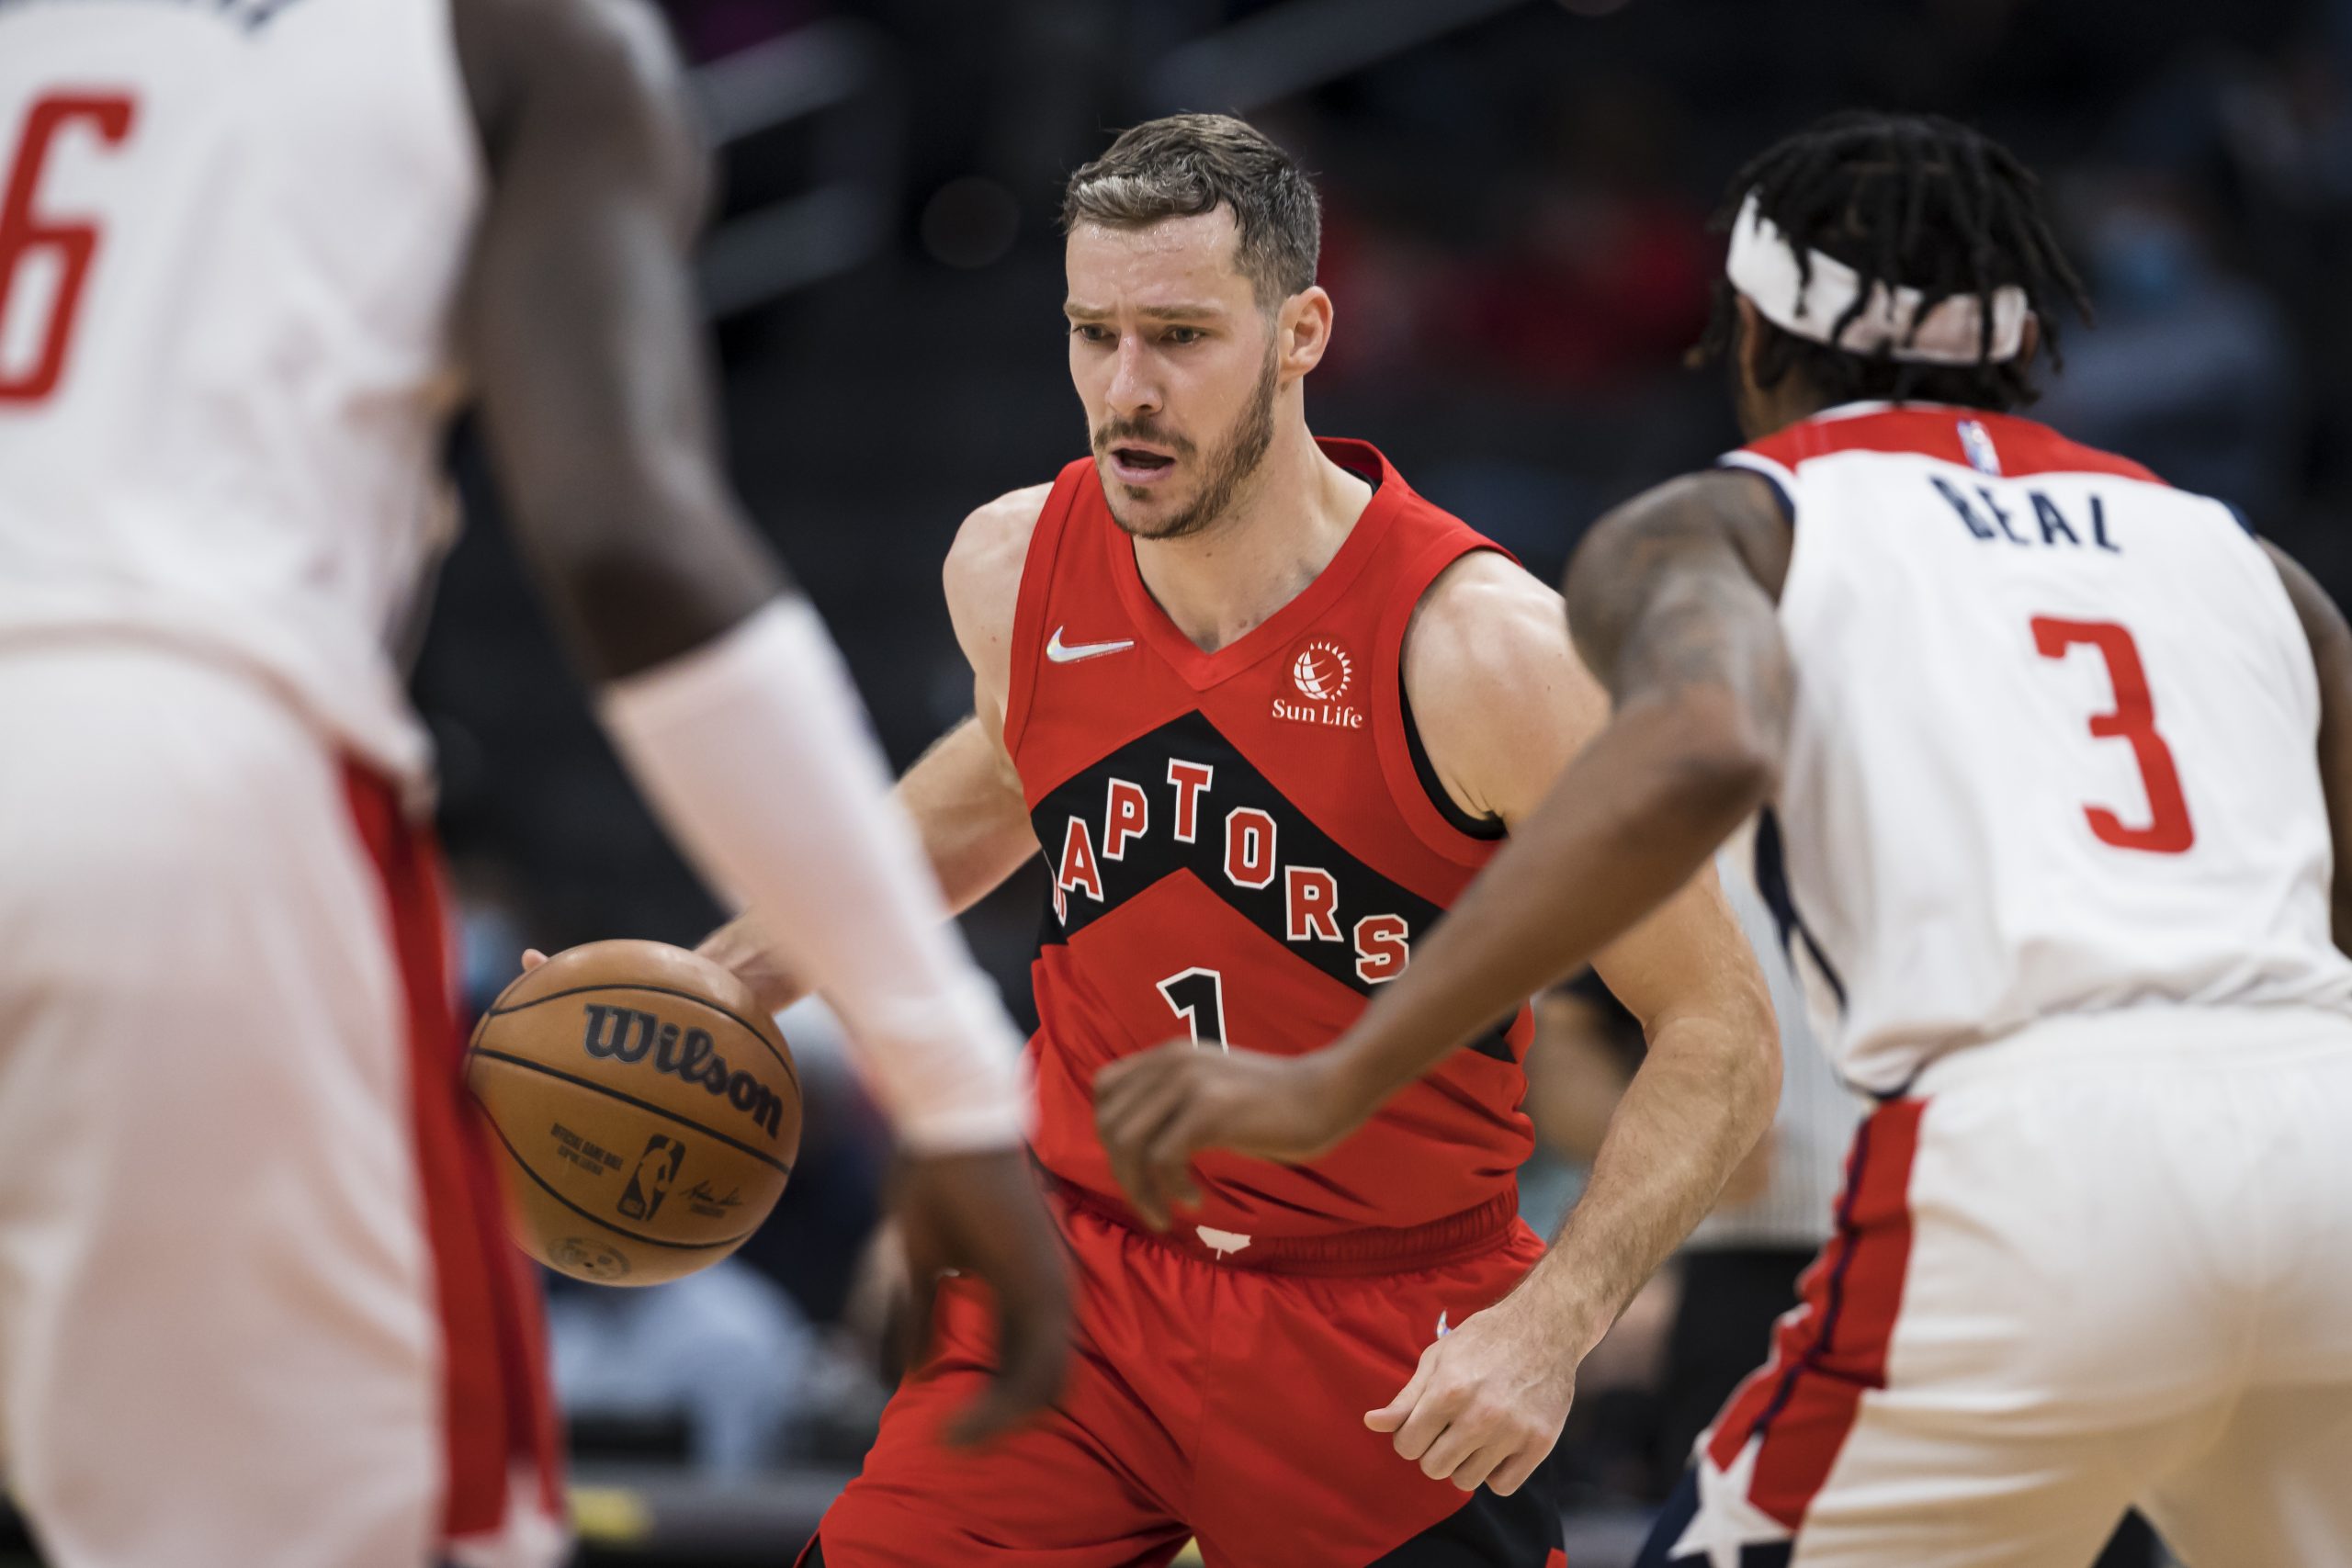 Goran Dragic Rumors: Here Are Likely Destinations for the Free Agent